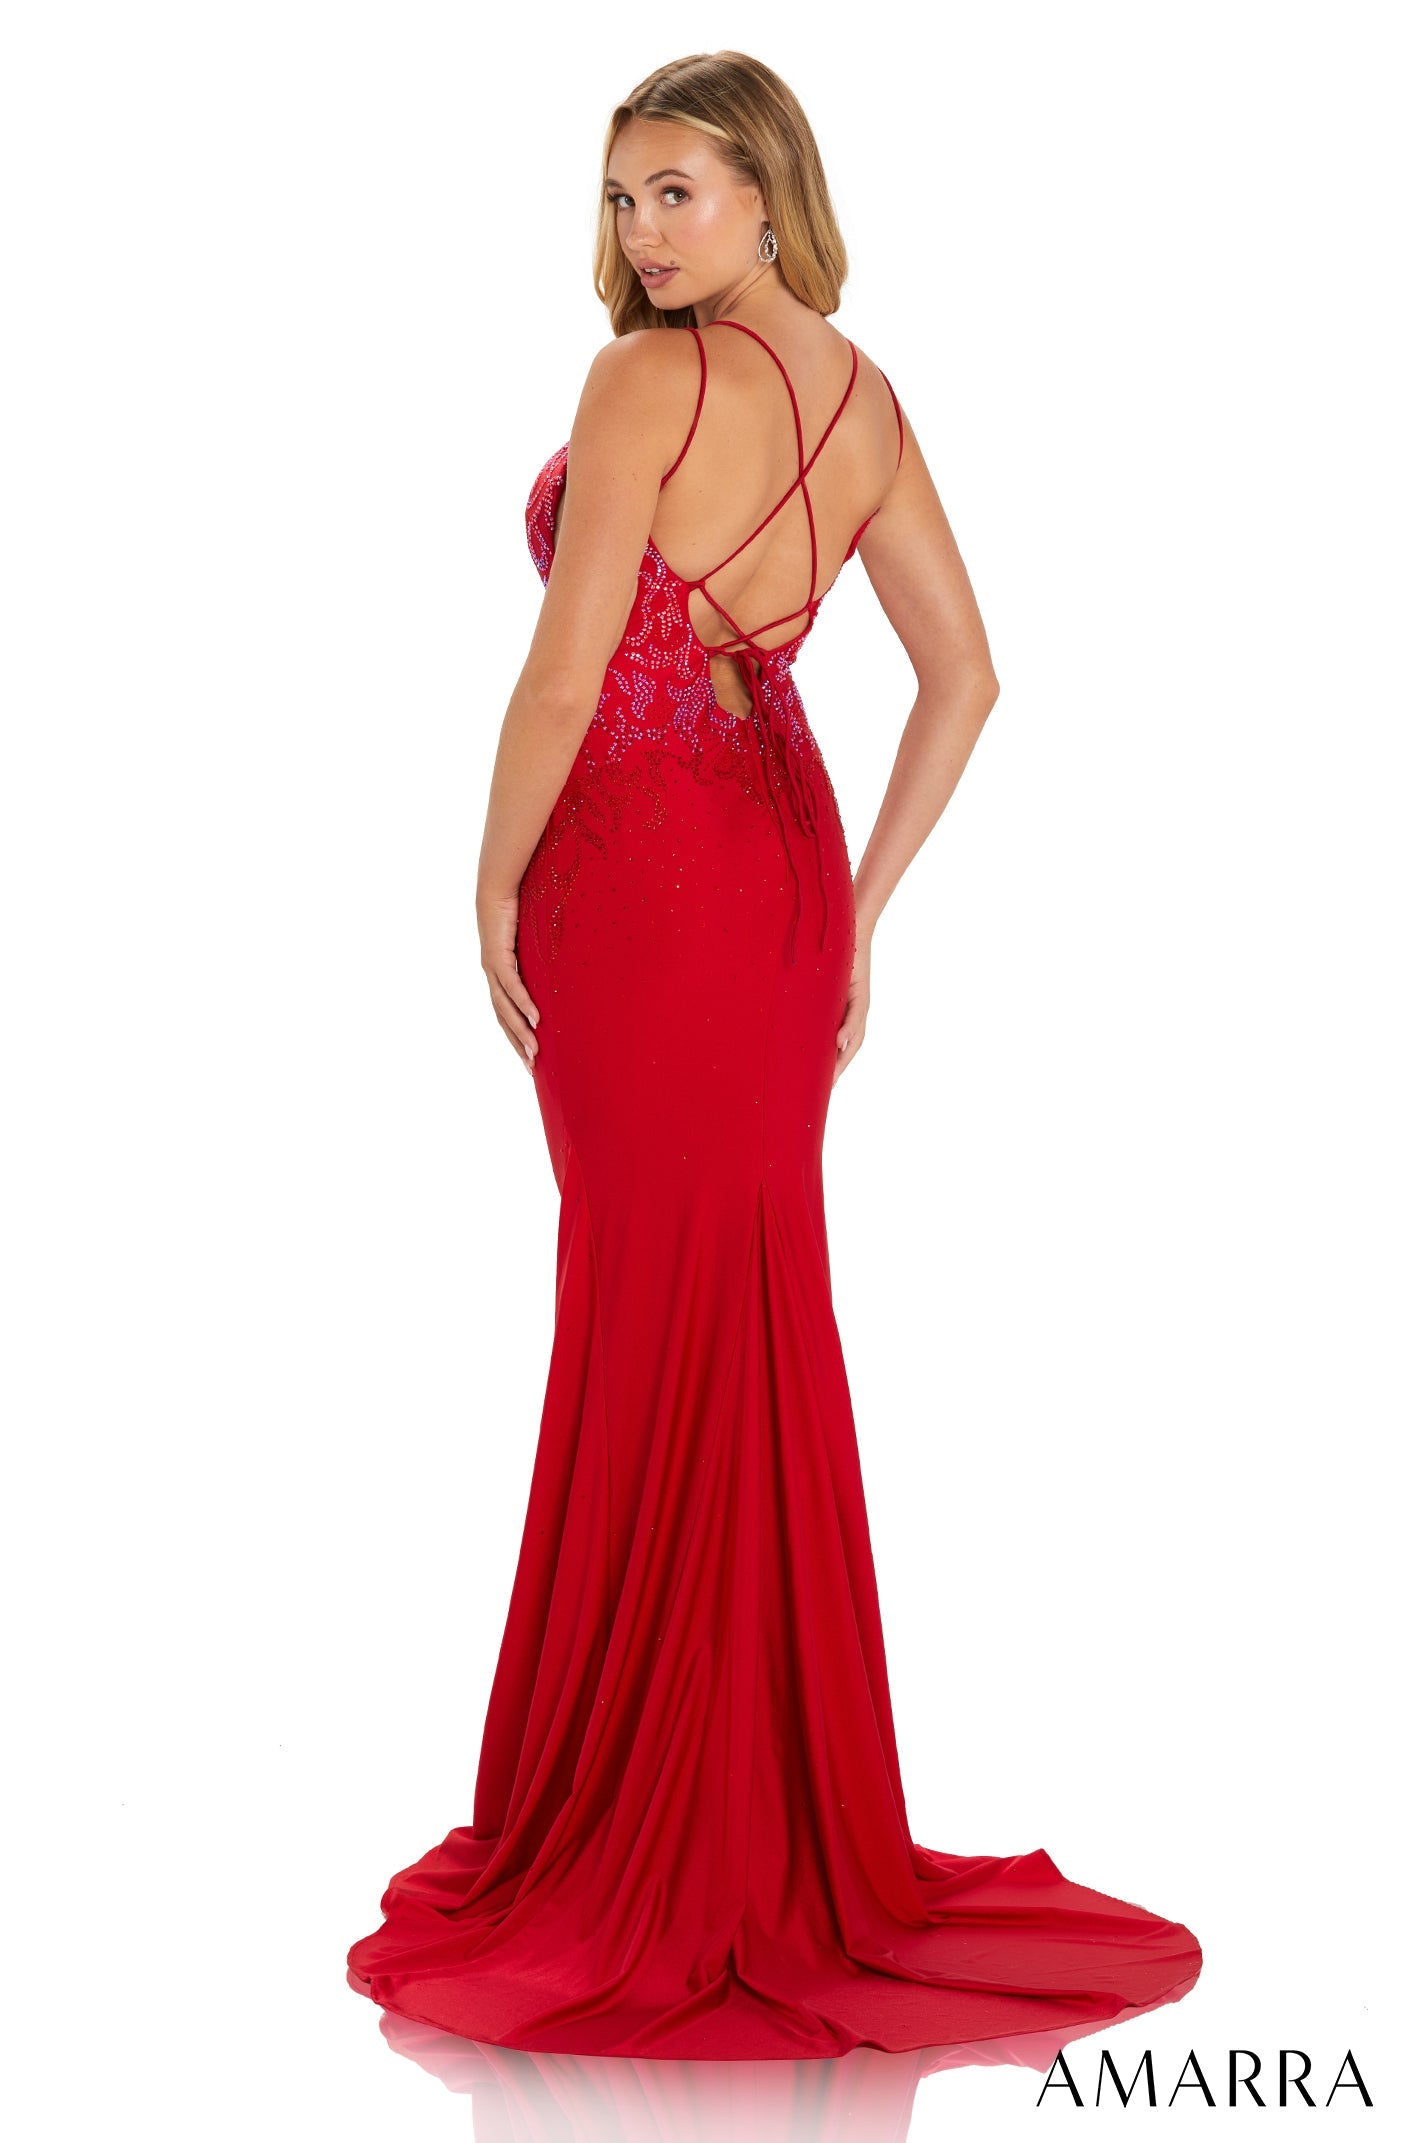 Amarra 20019 Long Fitted Backless Prom Dress Embellished V Neck Slit corset.  When it comes to prom night, it’s all in the details. Style 20019 features a plunging neckline embellished with beautiful accents. A slit skirt and lace up back add a spicy touch to an elegant gown.